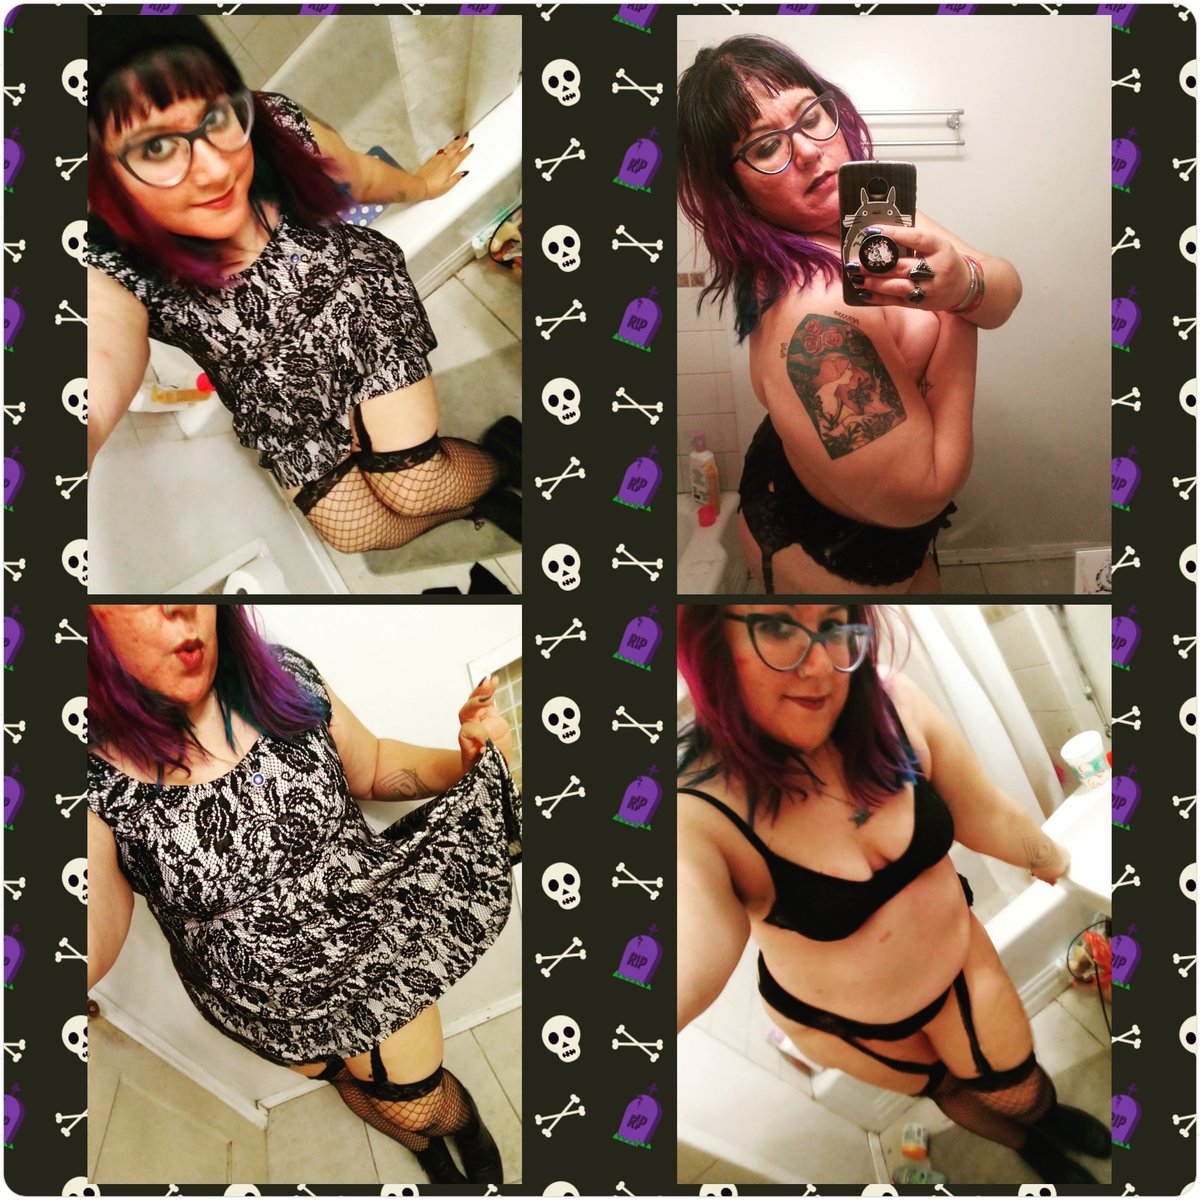 Comfortable in my skin, whether showing some, none, or all of it! #bodypositive #bodypositivity #tattoos #curvygirl #stockings #fishnets #prettydress #girlswithtattoos #girlswearingglasses #goth #gothicc #thicc #hotmom